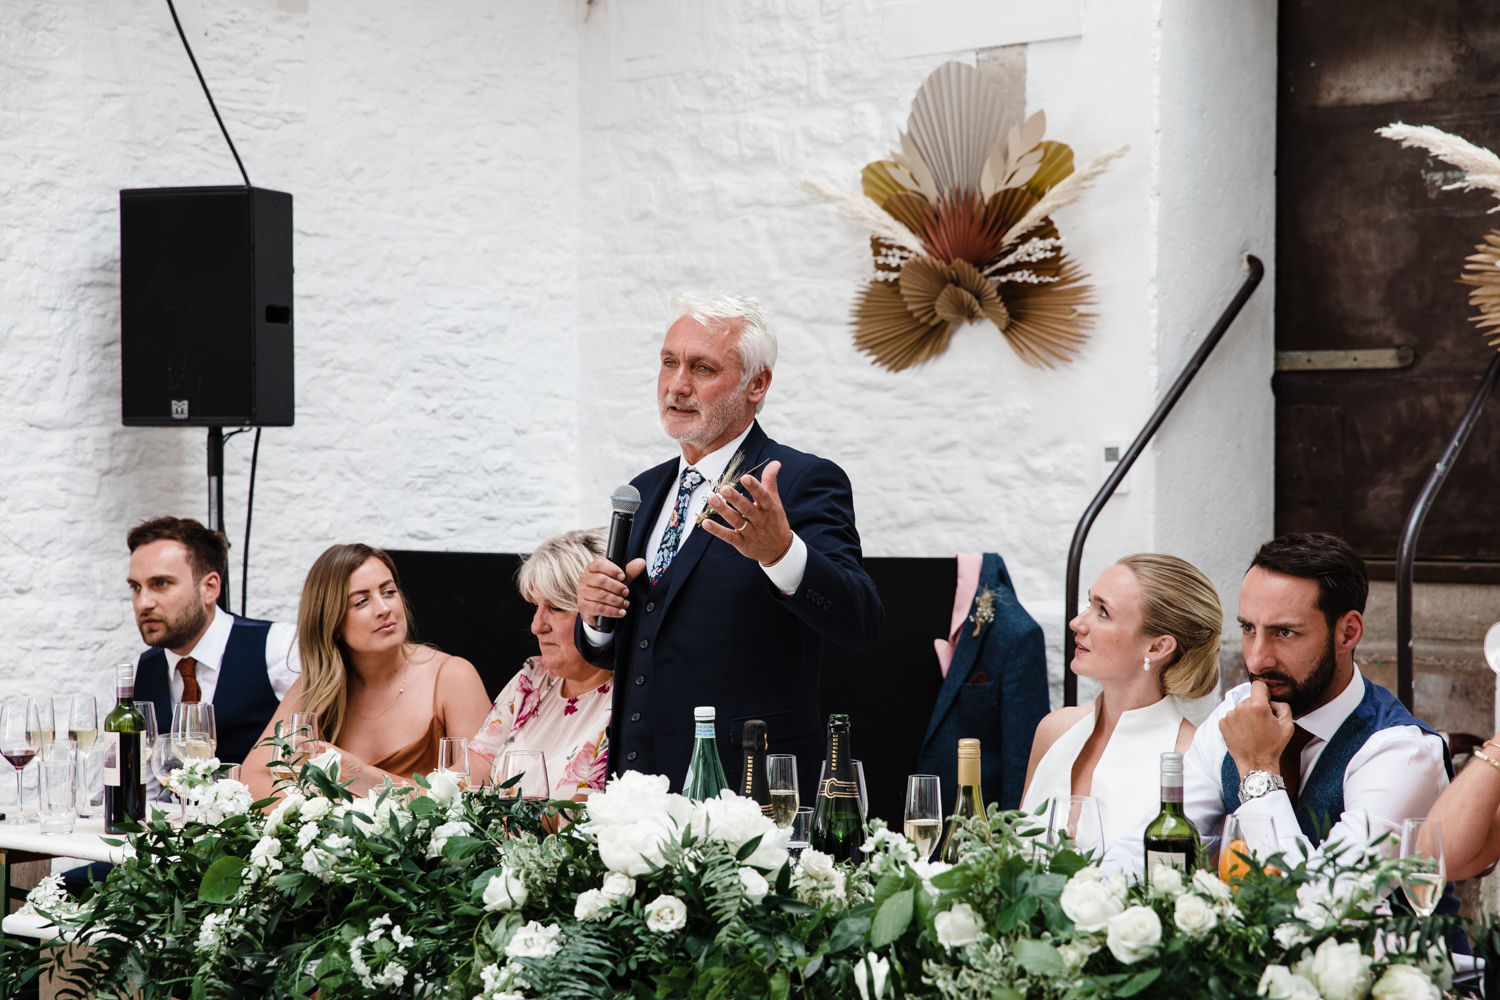 A father of the bride gives a speech to the wedding party